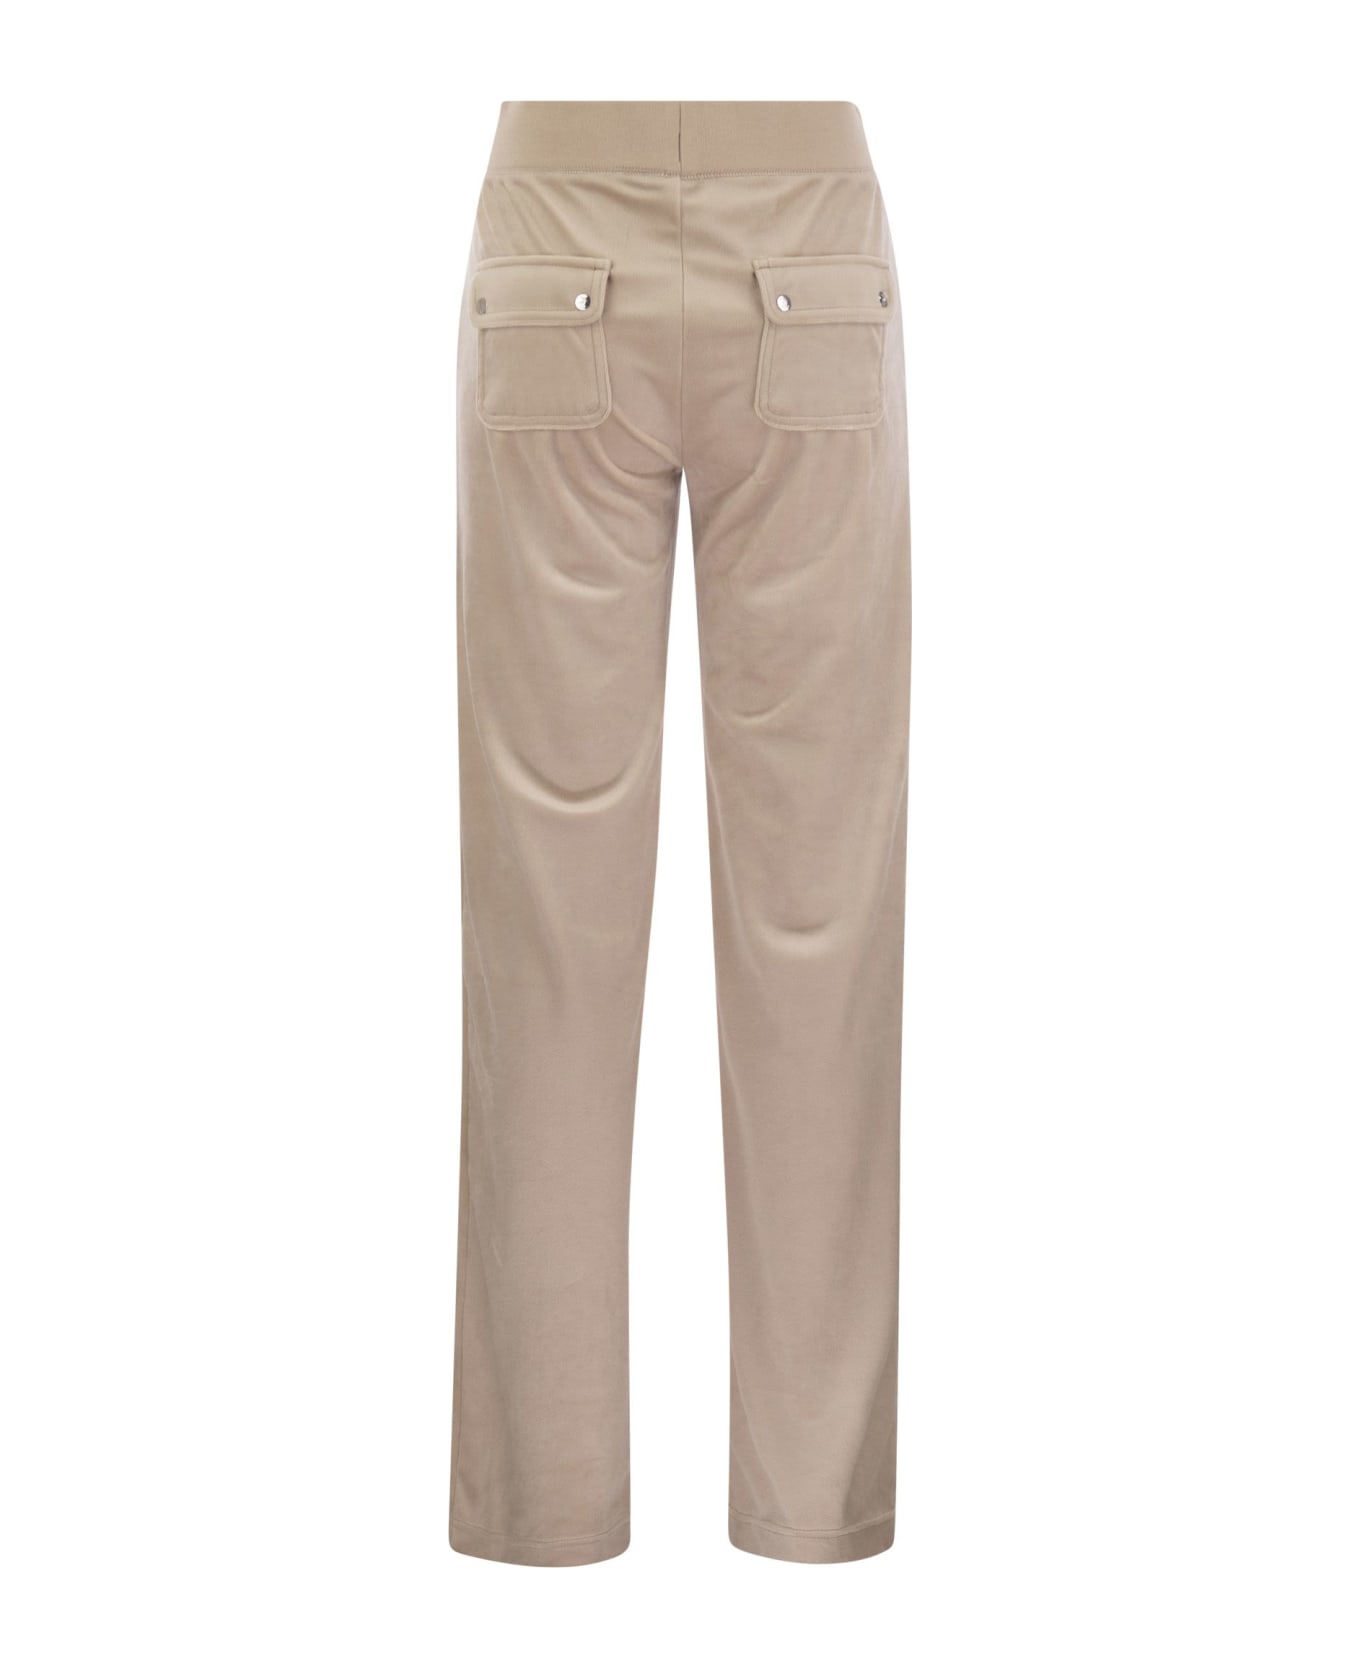 Juicy Couture Trousers With Velour Pockets - Beige